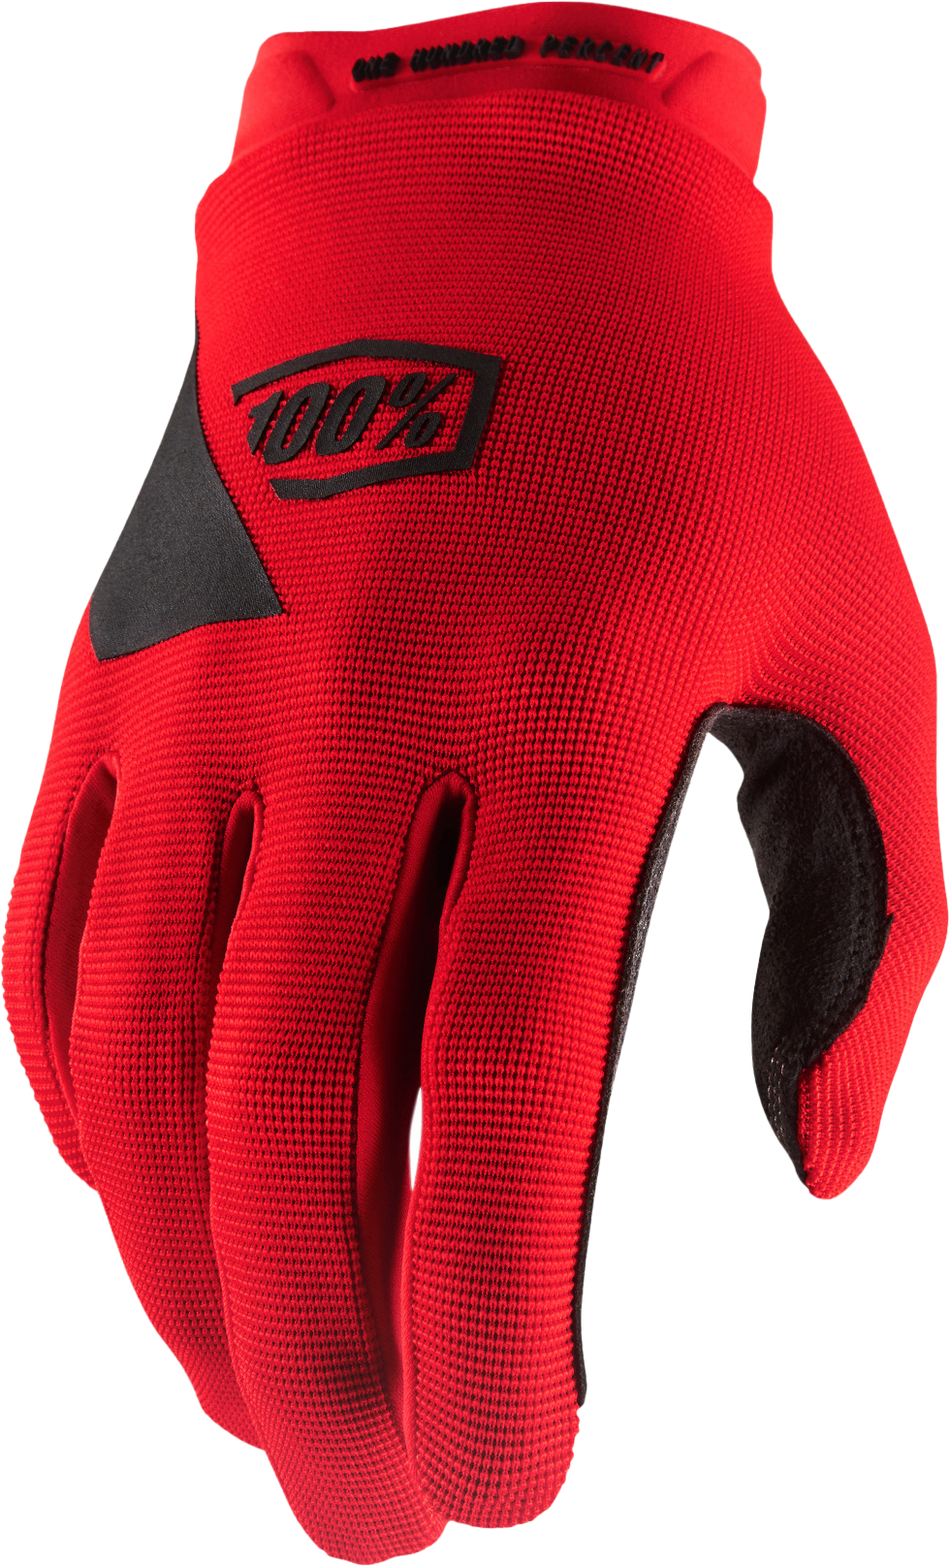 100% Ridecamp Gloves Red Sm 10011-00020